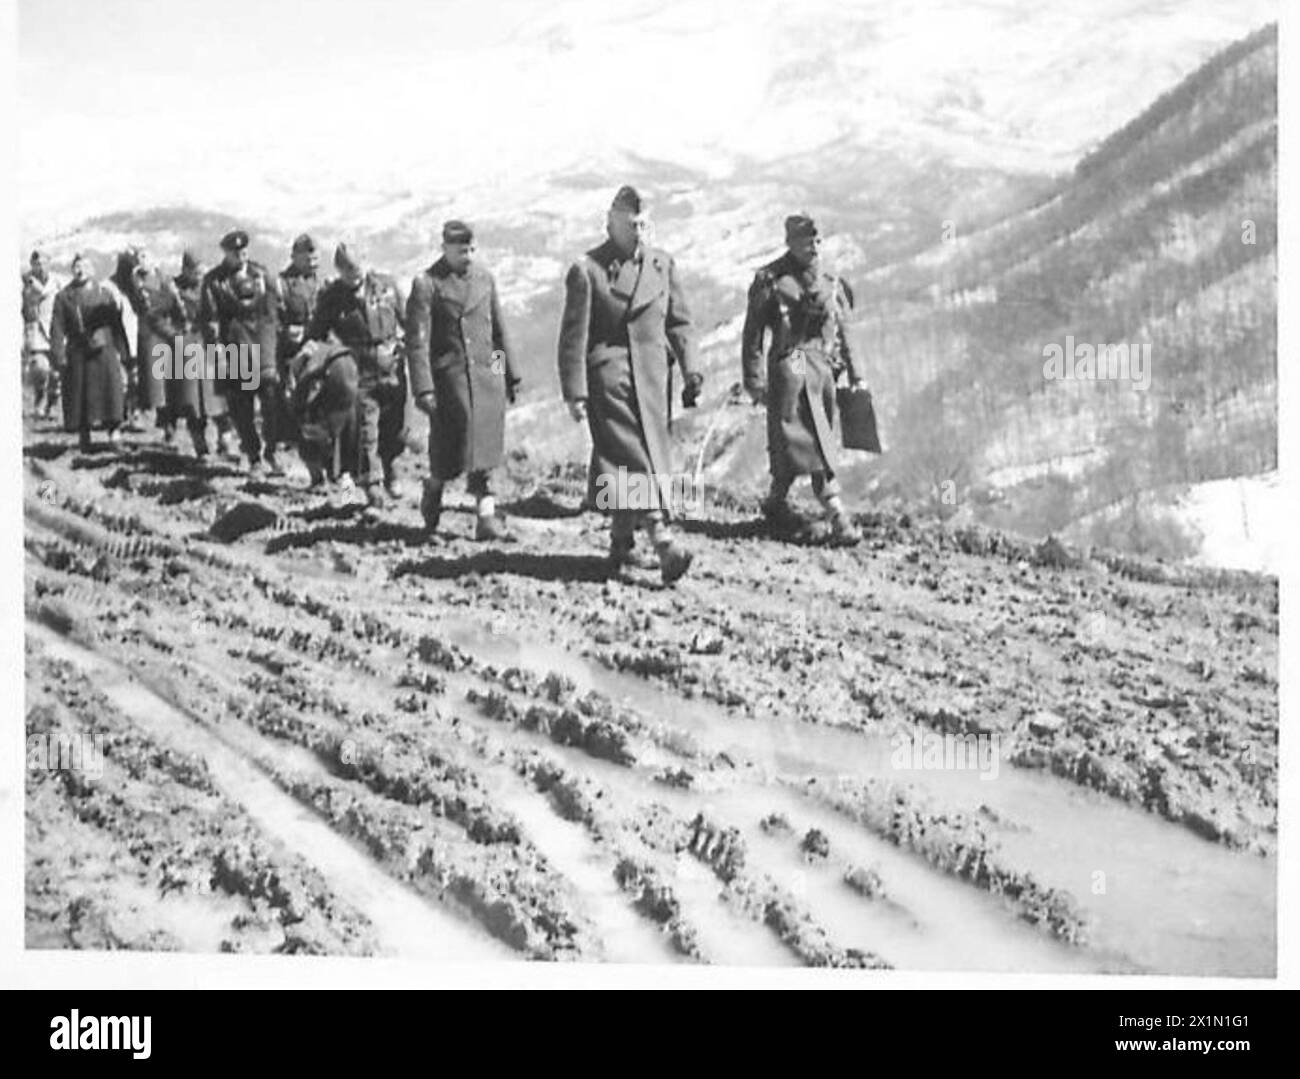 THE POLISH ARMY IN THE ITALIAN CAMPAIGN, 1943-1945 - General Kazimierz Sosnkowski, the C-in-C of the Polish Armed Forces, and his party walking alongside a muddy road outside San Pietro Avellana during his visit to various units of the 3rd Carpathian Rifles Division (2nd Polish Corps), 28/29 March 1944.General Stanisław Kopański, the Chief of the Polish General Staff, is walking behind General Sosnkowski followed by General Bolesław Duch, the Commander of the Division (holding a coat in his hands), Polish Army, Polish Armed Forces in the West, Polish Corps, II, Polish Armed Forces in the West, Stock Photo